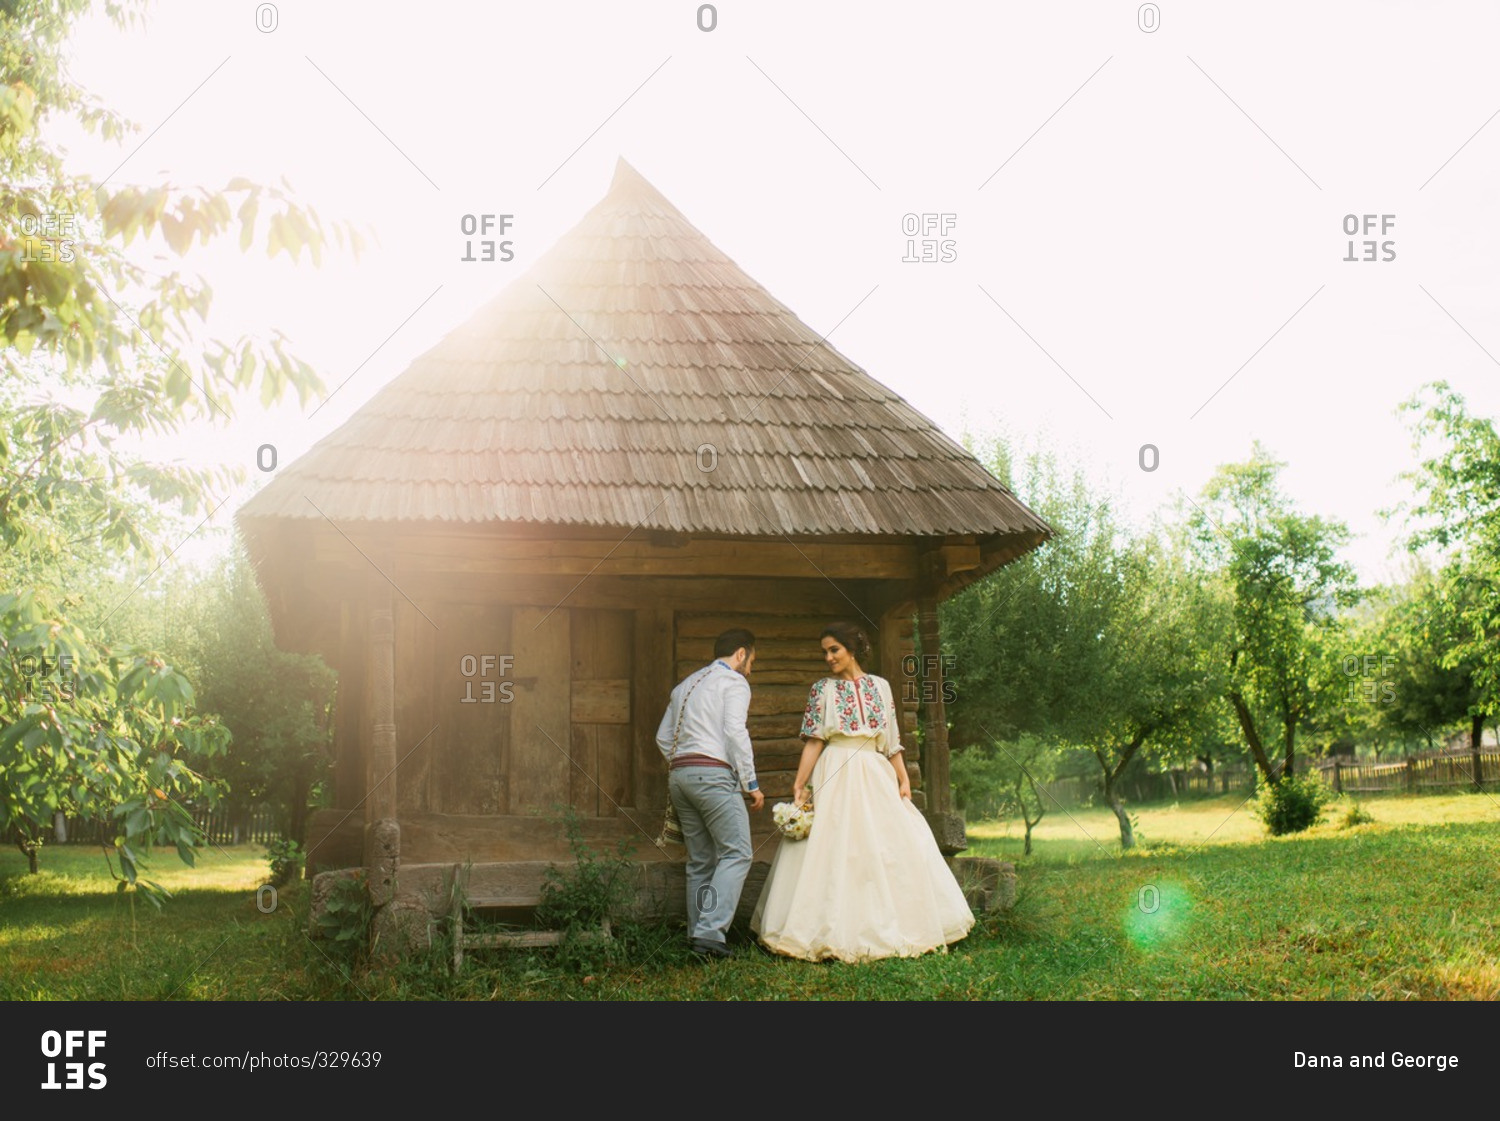 Romanian bride and groom by rustic farm building at a traditional country wedding